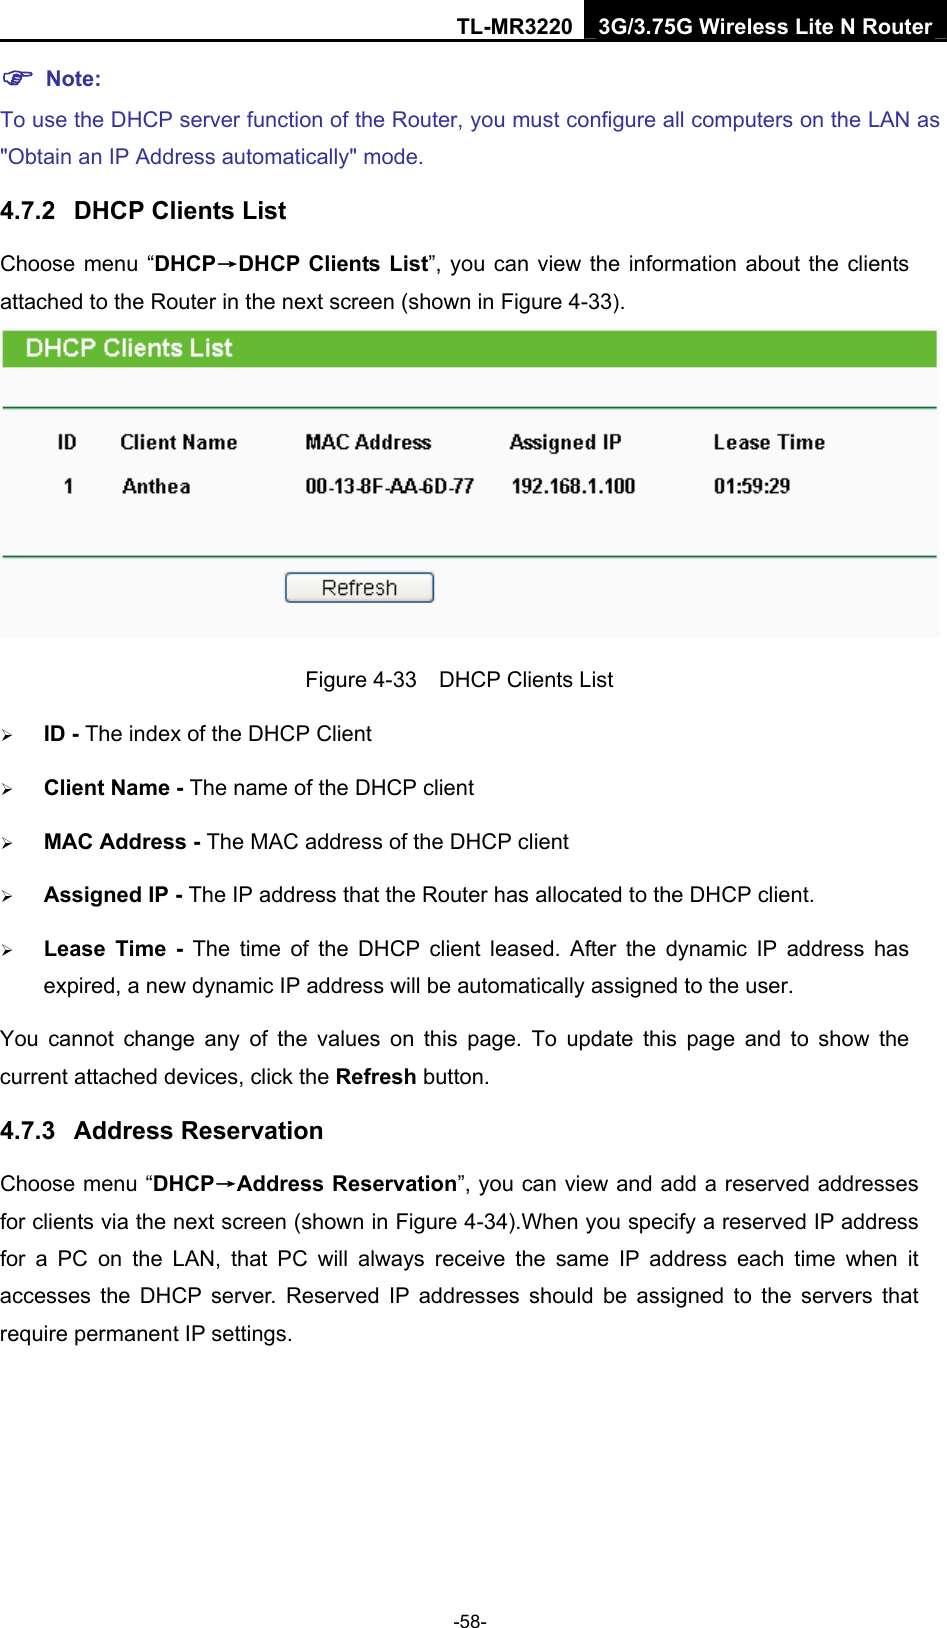 TL-MR3220 3G/3.75G Wireless Lite N Router -58- ) Note: To use the DHCP server function of the Router, you must configure all computers on the LAN as &quot;Obtain an IP Address automatically&quot; mode. 4.7.2  DHCP Clients List Choose menu “DHCP→DHCP Clients List”, you can view the information about the clients attached to the Router in the next screen (shown in Figure 4-33).  Figure 4-33    DHCP Clients List ¾ ID - The index of the DHCP Client   ¾ Client Name - The name of the DHCP client   ¾ MAC Address - The MAC address of the DHCP client   ¾ Assigned IP - The IP address that the Router has allocated to the DHCP client. ¾ Lease Time - The time of the DHCP client leased. After the dynamic IP address has expired, a new dynamic IP address will be automatically assigned to the user. You cannot change any of the values on this page. To update this page and to show the current attached devices, click the Refresh button. 4.7.3  Address Reservation Choose menu “DHCP→Address Reservation”, you can view and add a reserved addresses for clients via the next screen (shown in Figure 4-34).When you specify a reserved IP address for a PC on the LAN, that PC will always receive the same IP address each time when it accesses the DHCP server. Reserved IP addresses should be assigned to the servers that require permanent IP settings.   